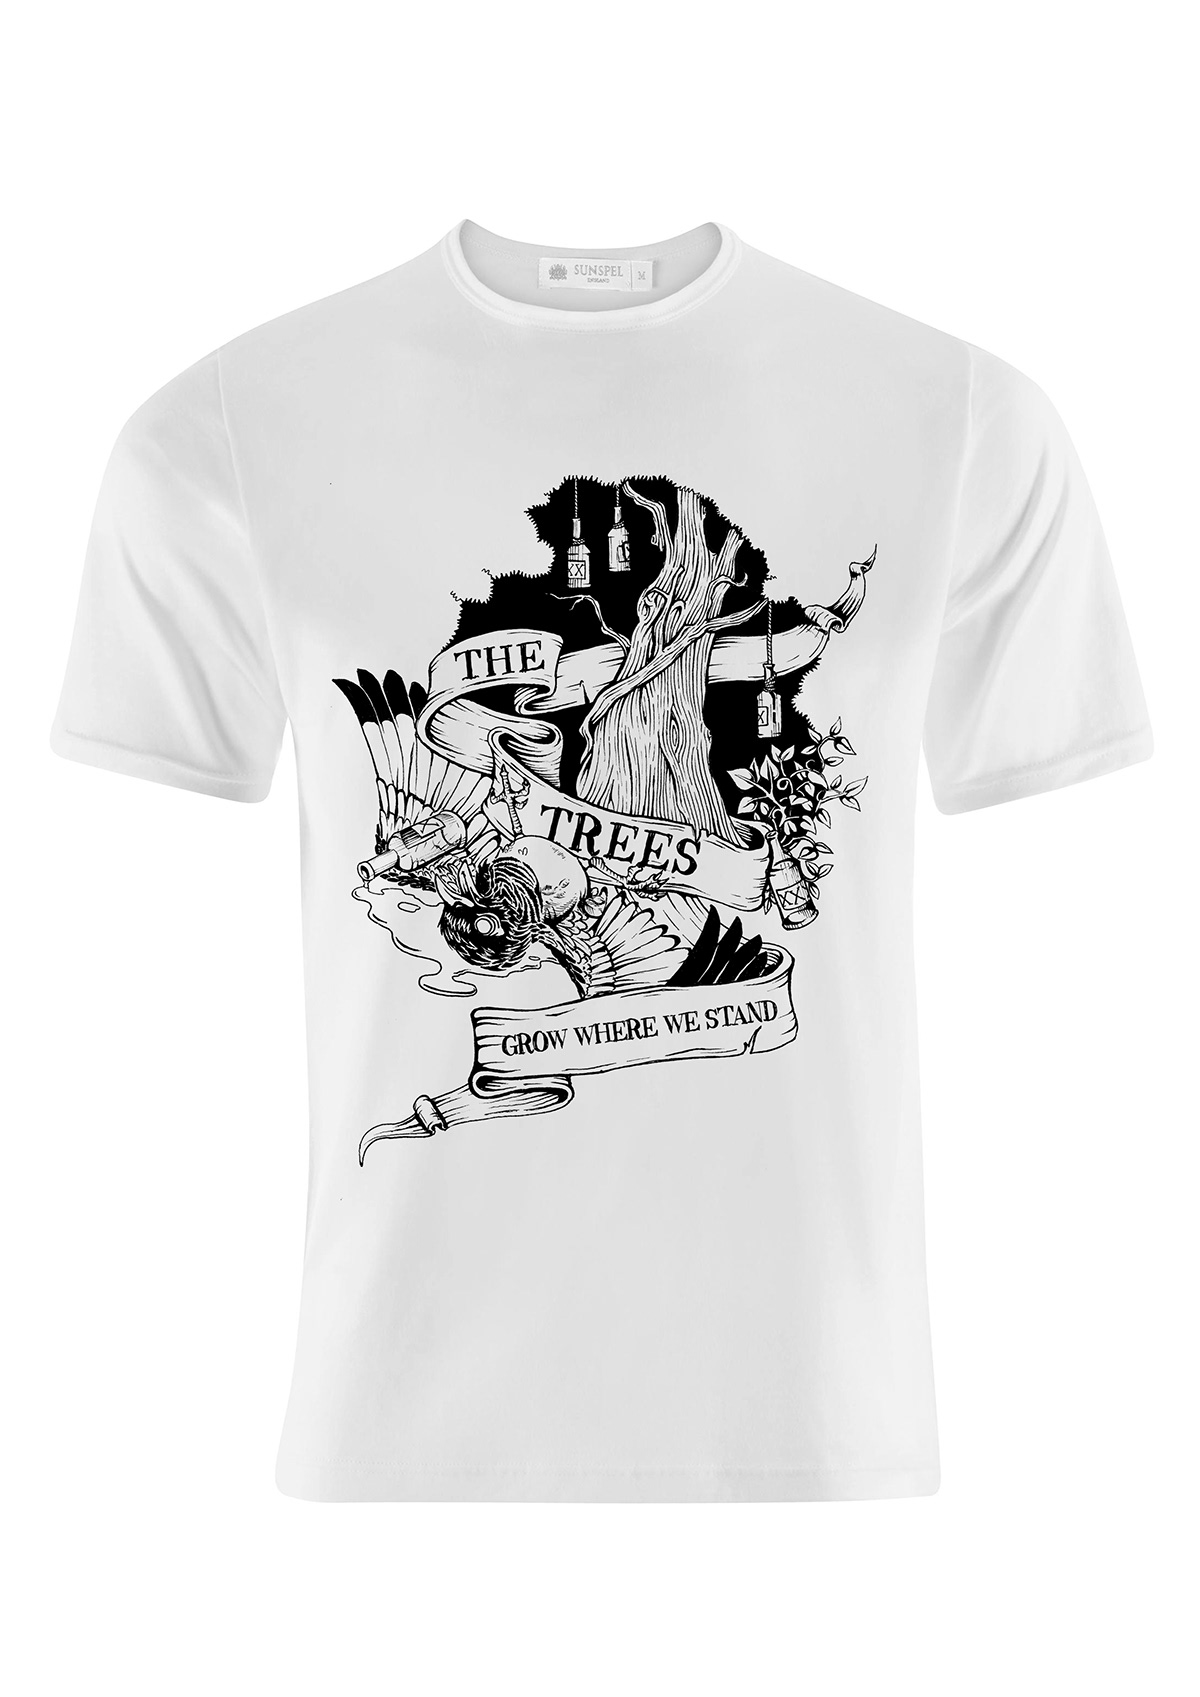 The Trees bird durban south africa band t-shirt Tree  iron fist